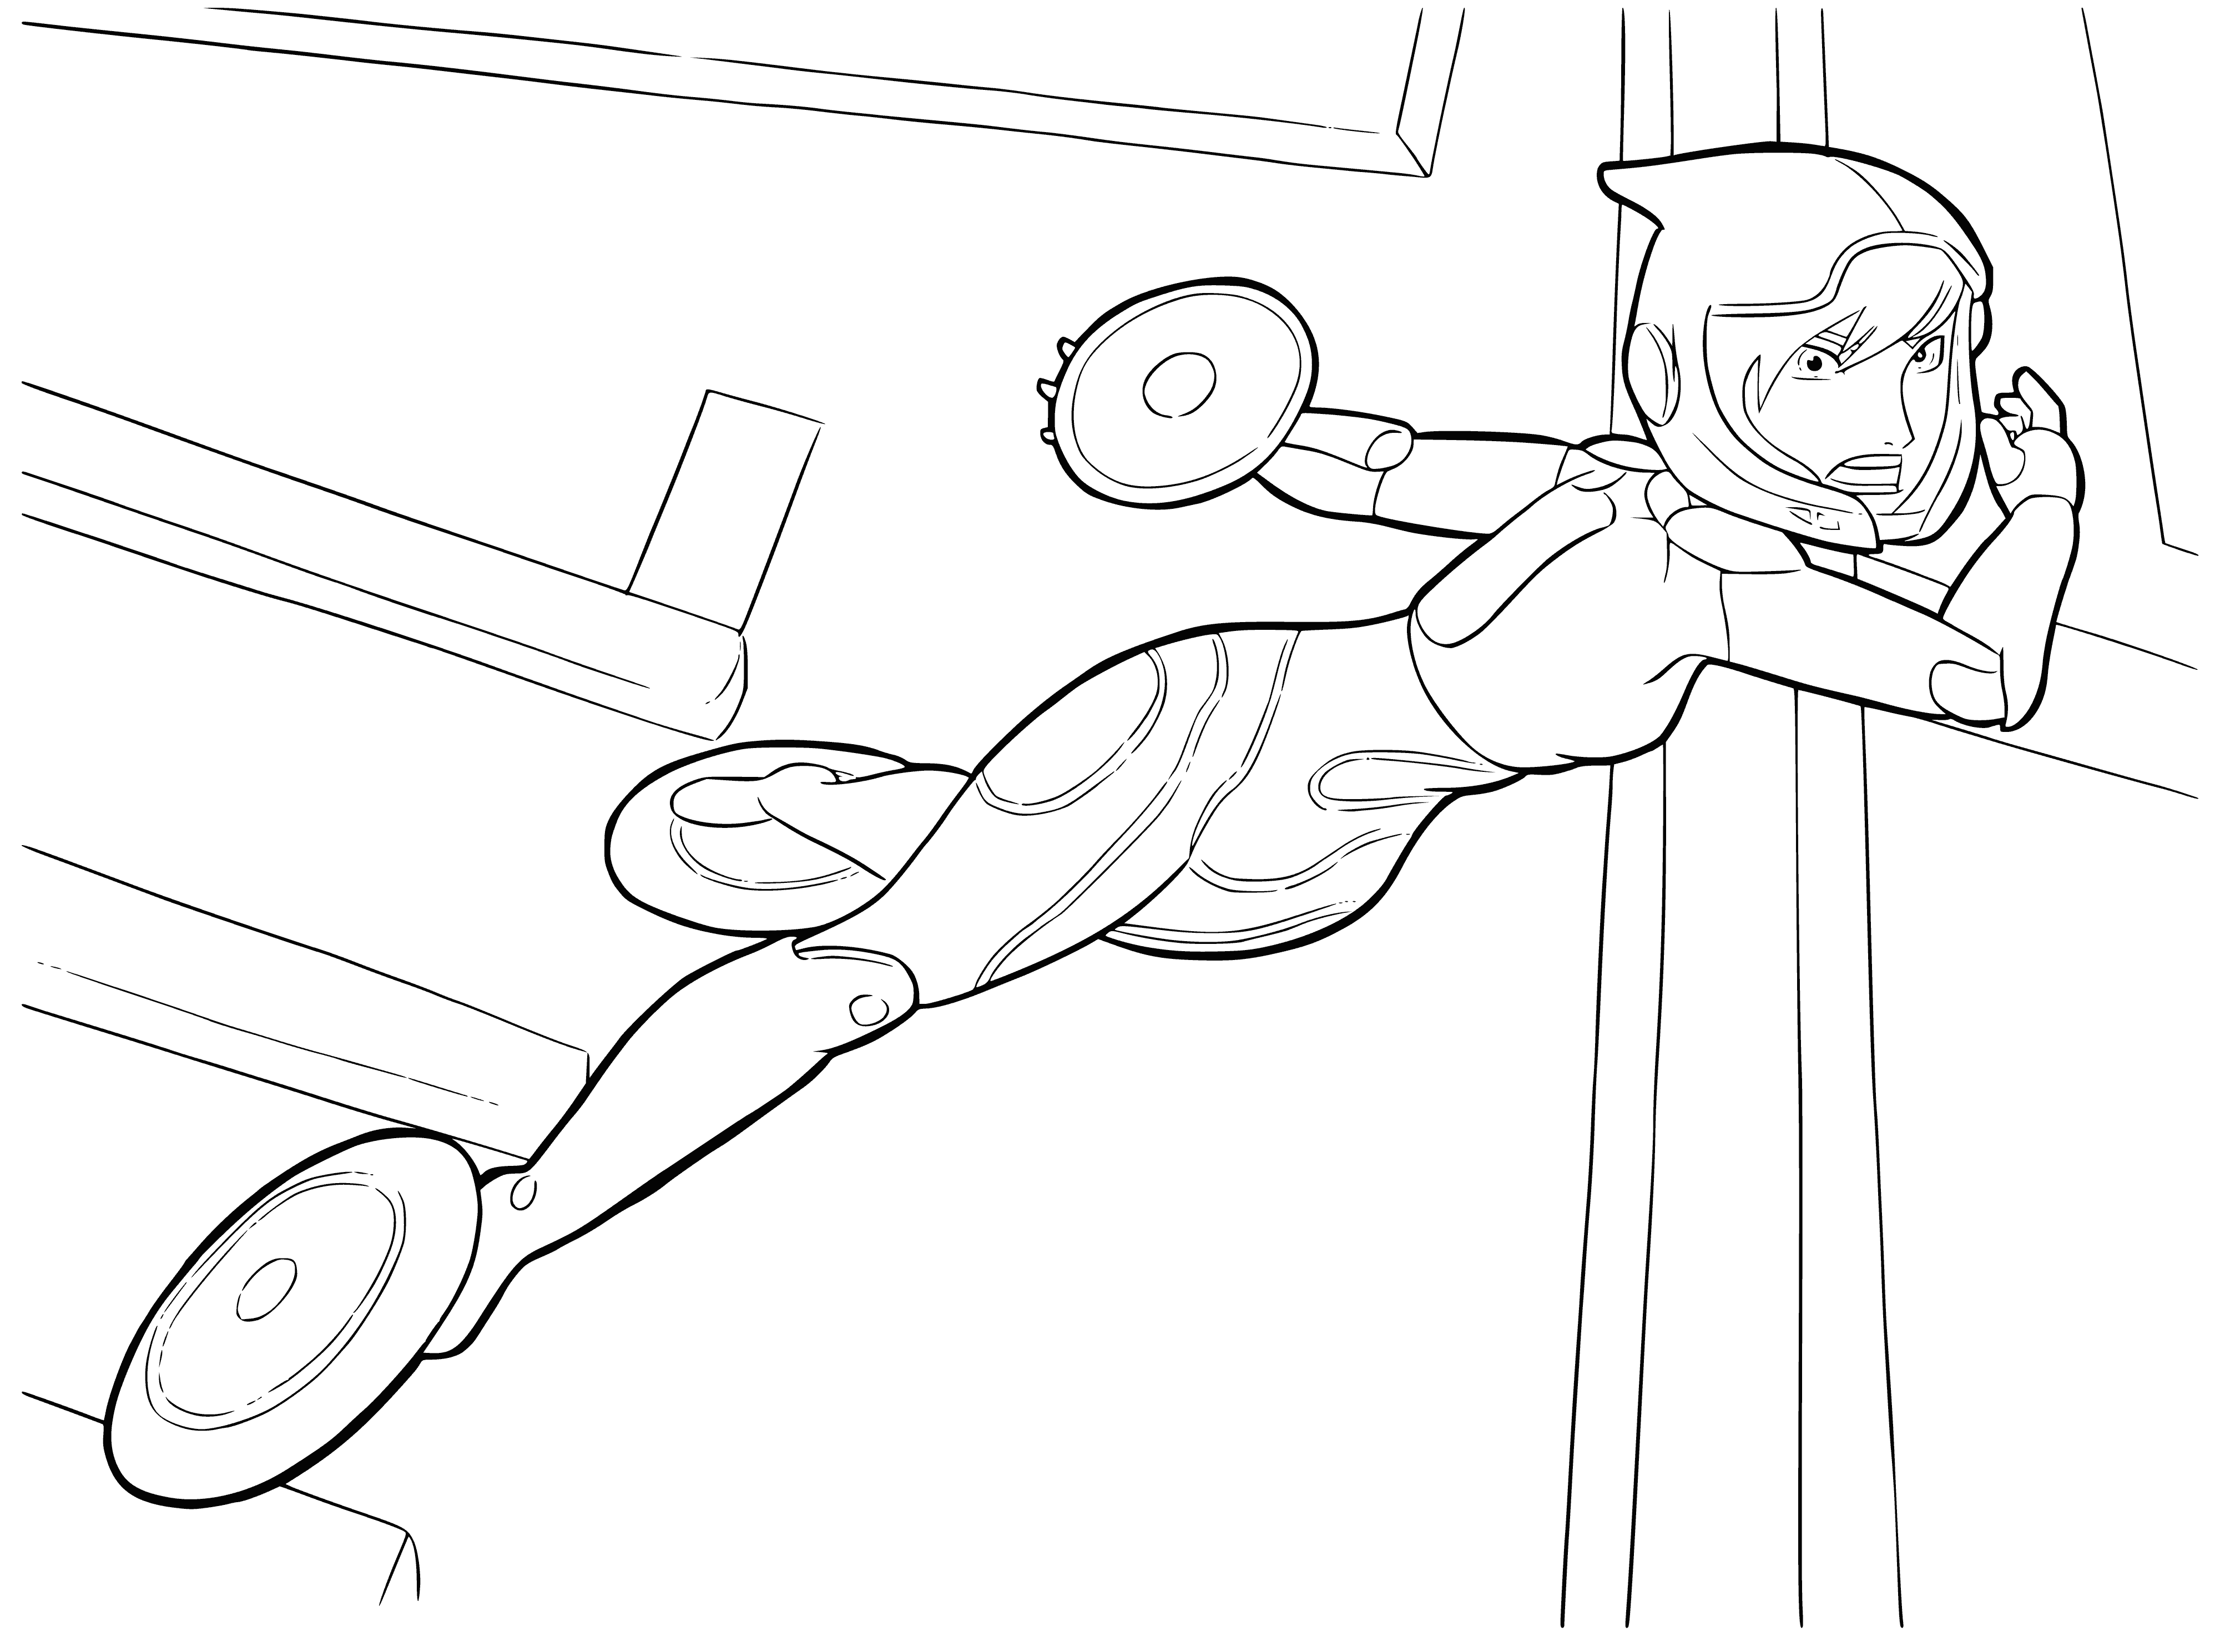 coloring page: GoGo Tomago loves speed and the feeling of being on the edge. Always racing around to go faster.